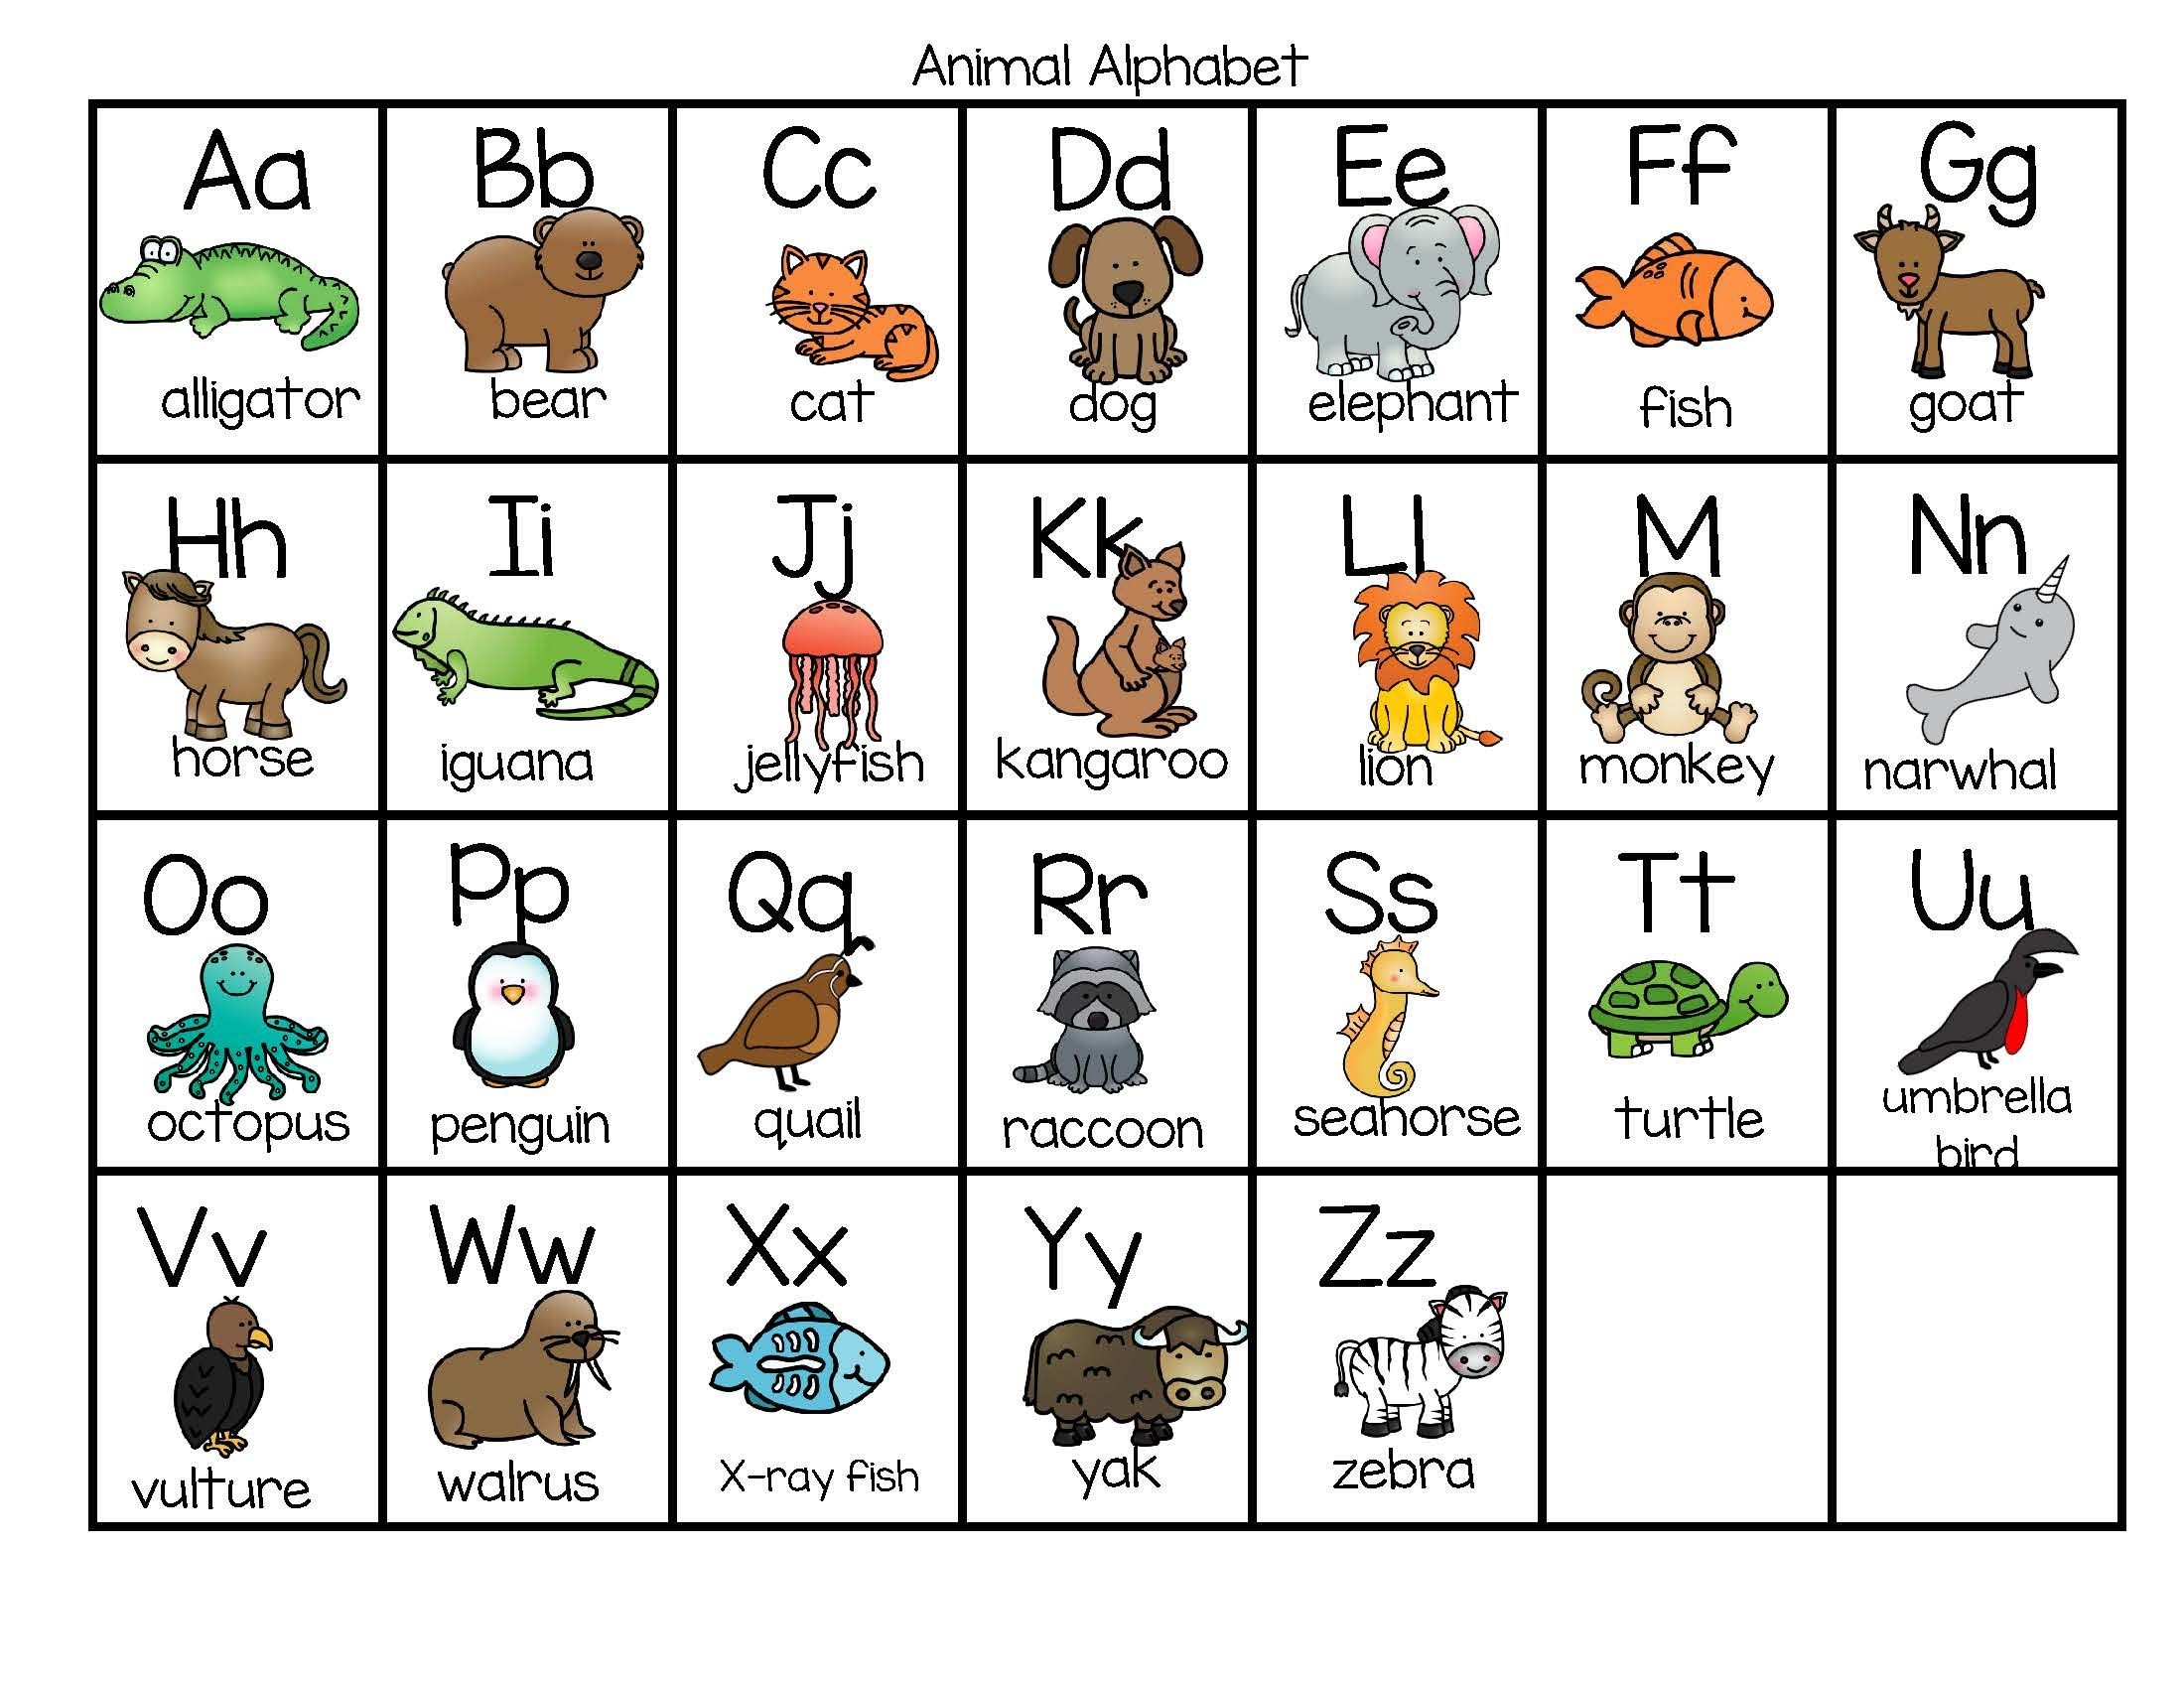 Animal Alphabet Charts In Color And BW FREE Alphabet Charts Animal Alphabet Alphabet Preschool